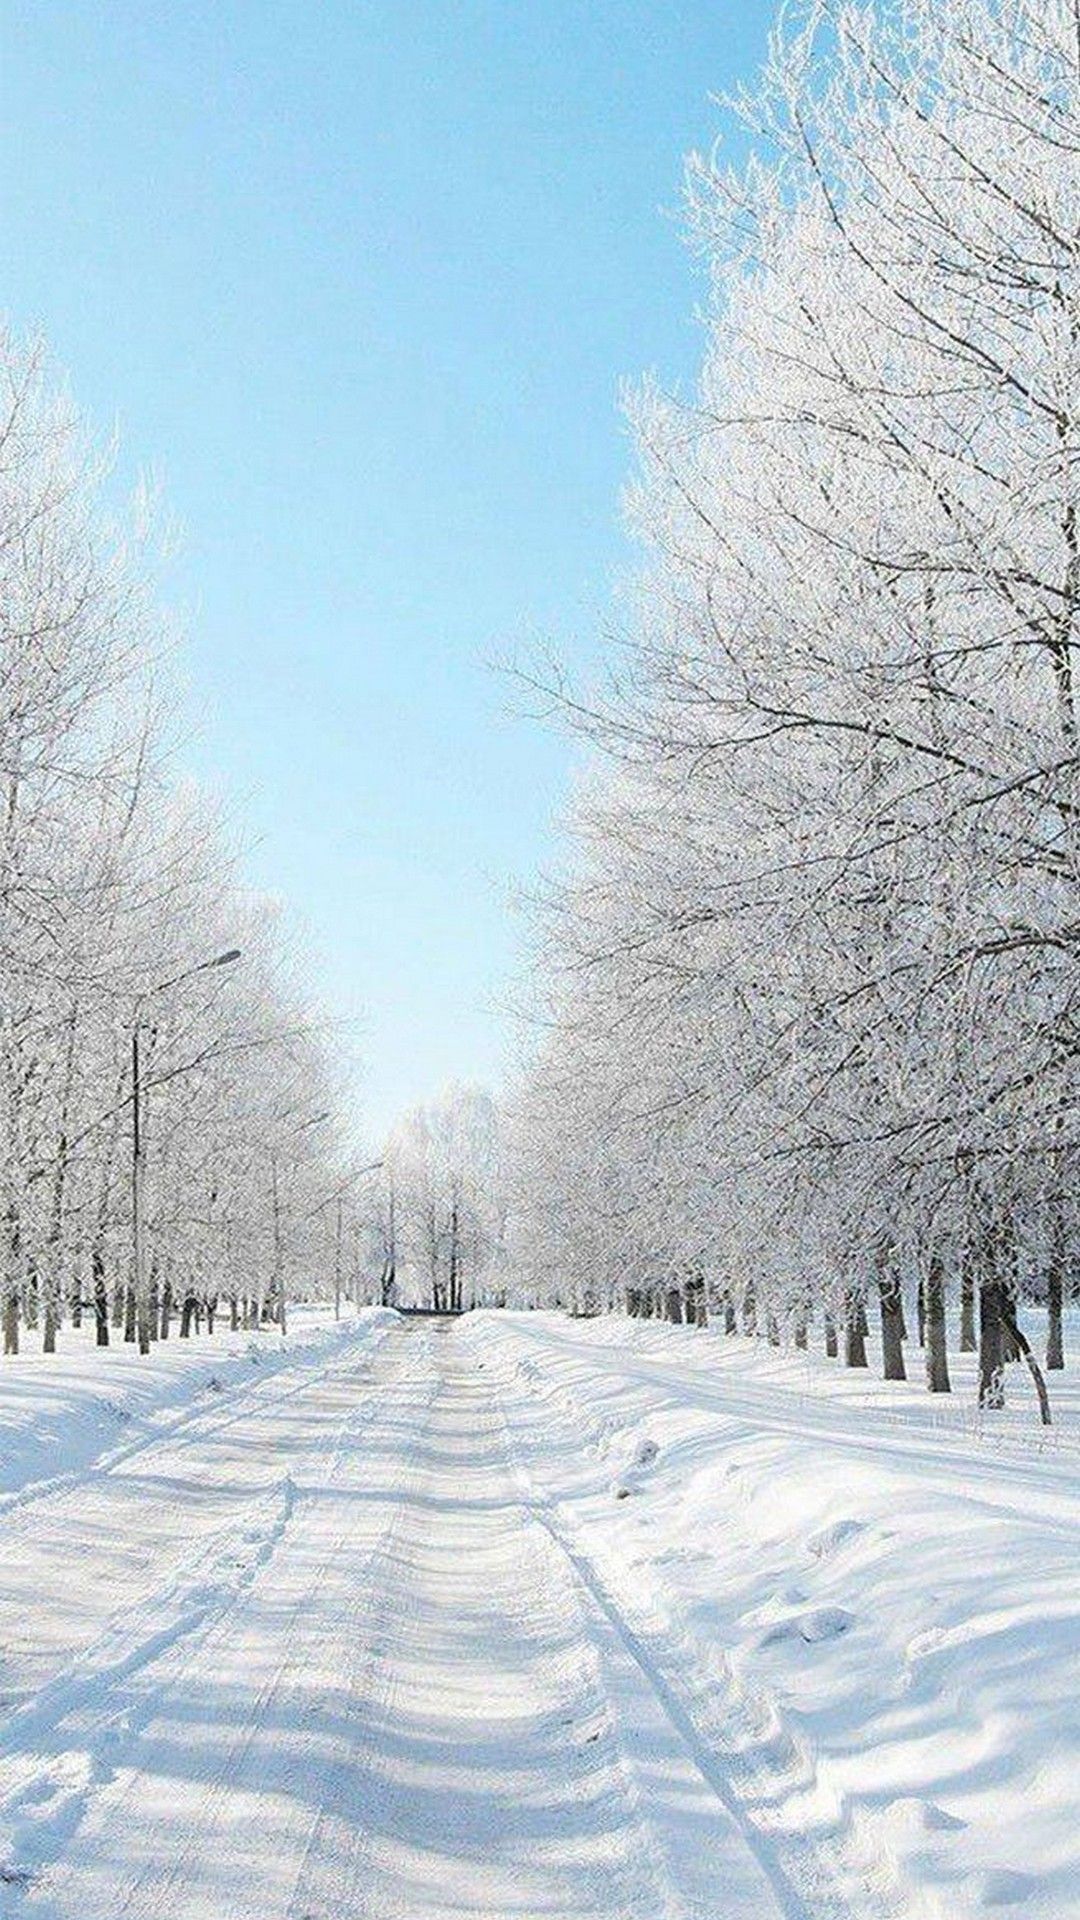 A snowy path with trees on both sides and a blue sky above. - Winter, snow